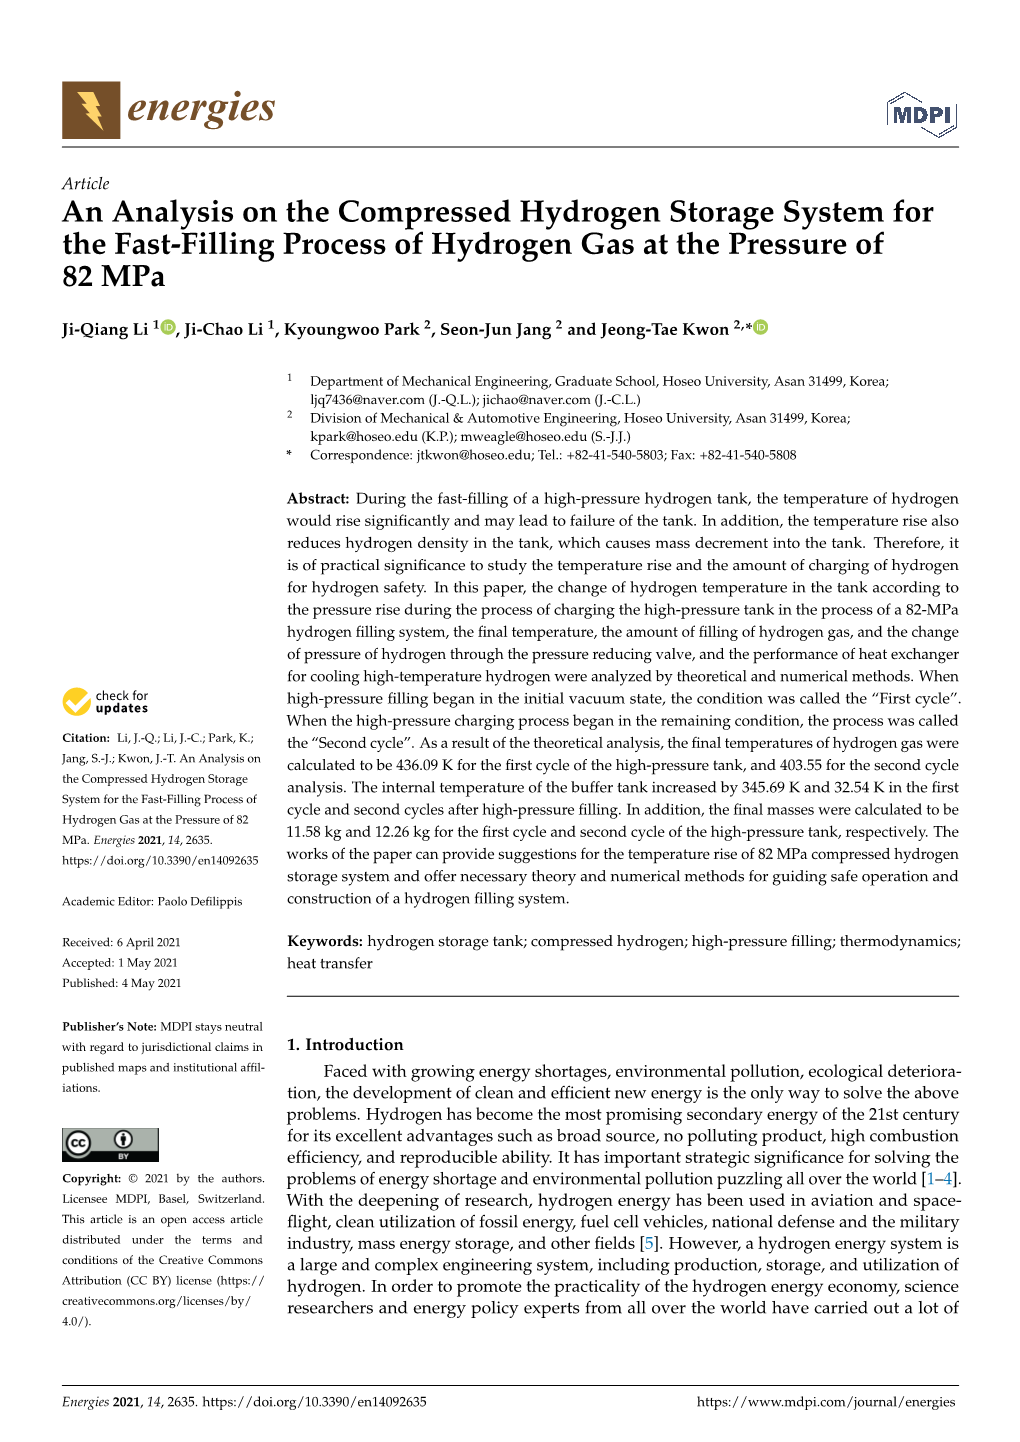 An Analysis on the Compressed Hydrogen Storage System for the Fast-Filling Process of Hydrogen Gas at the Pressure of 82 Mpa